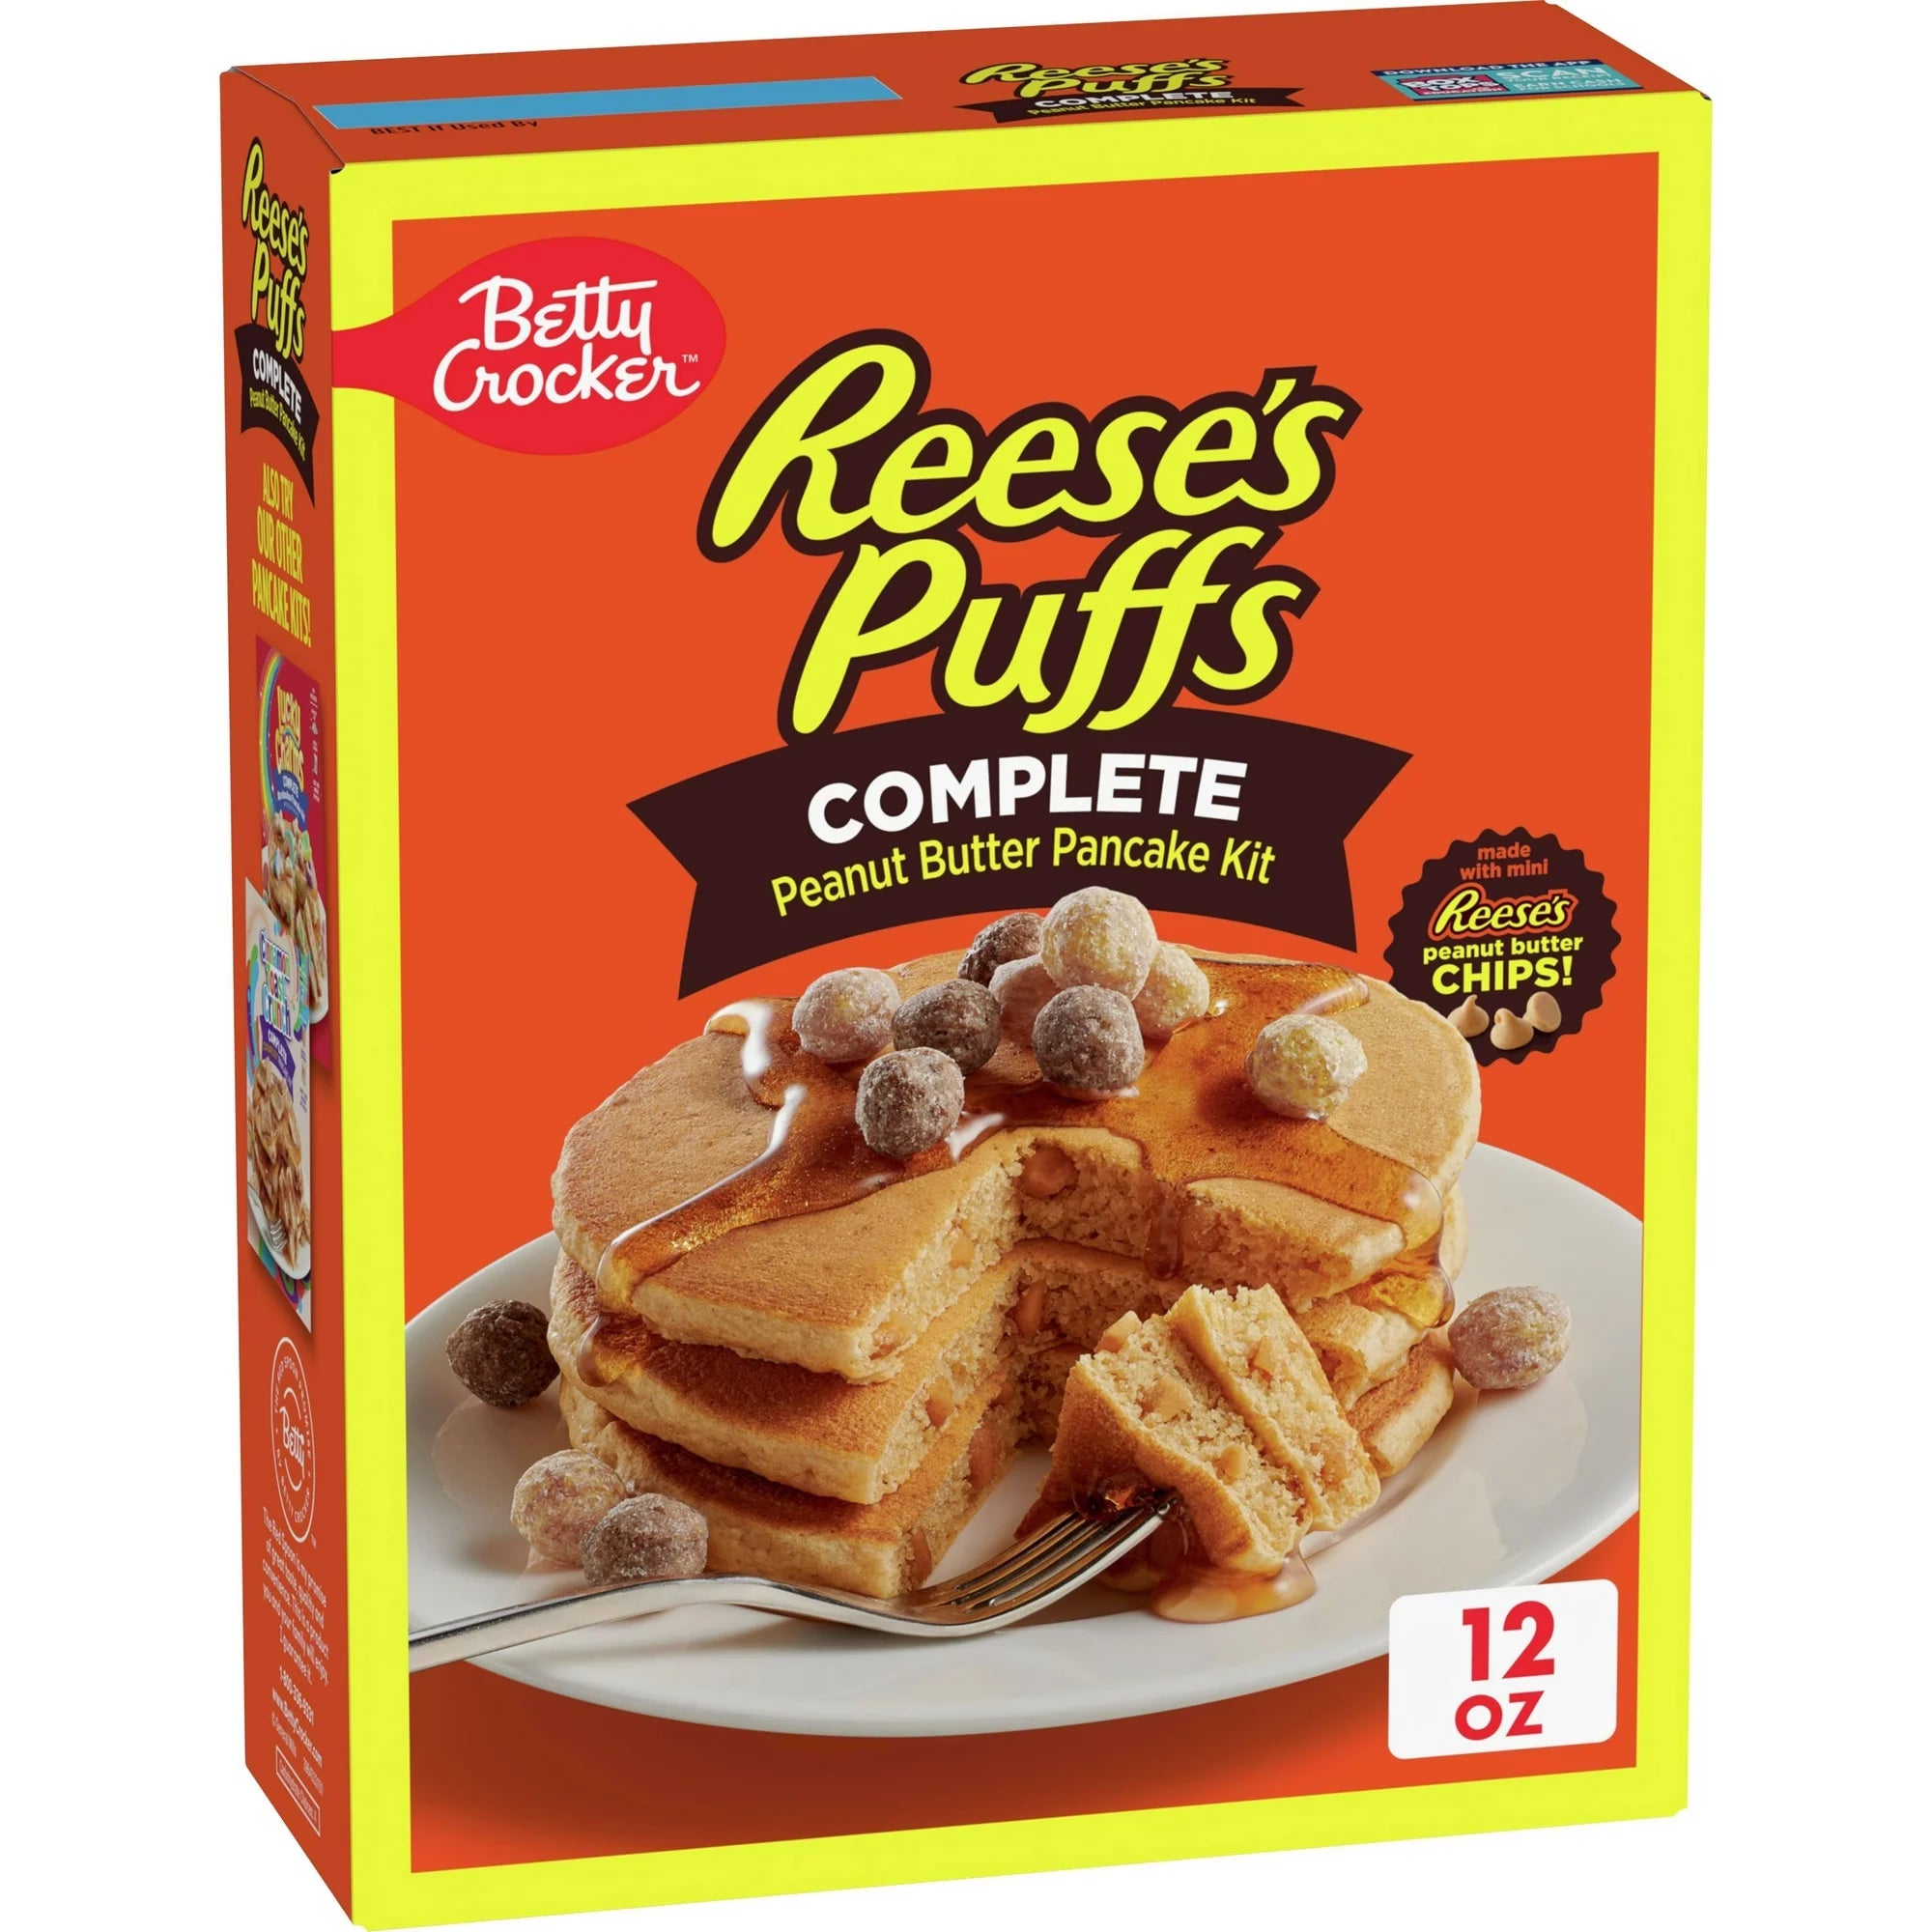 Reese's Puff's Complete Peanut Butter Pancake Mix (12oz)